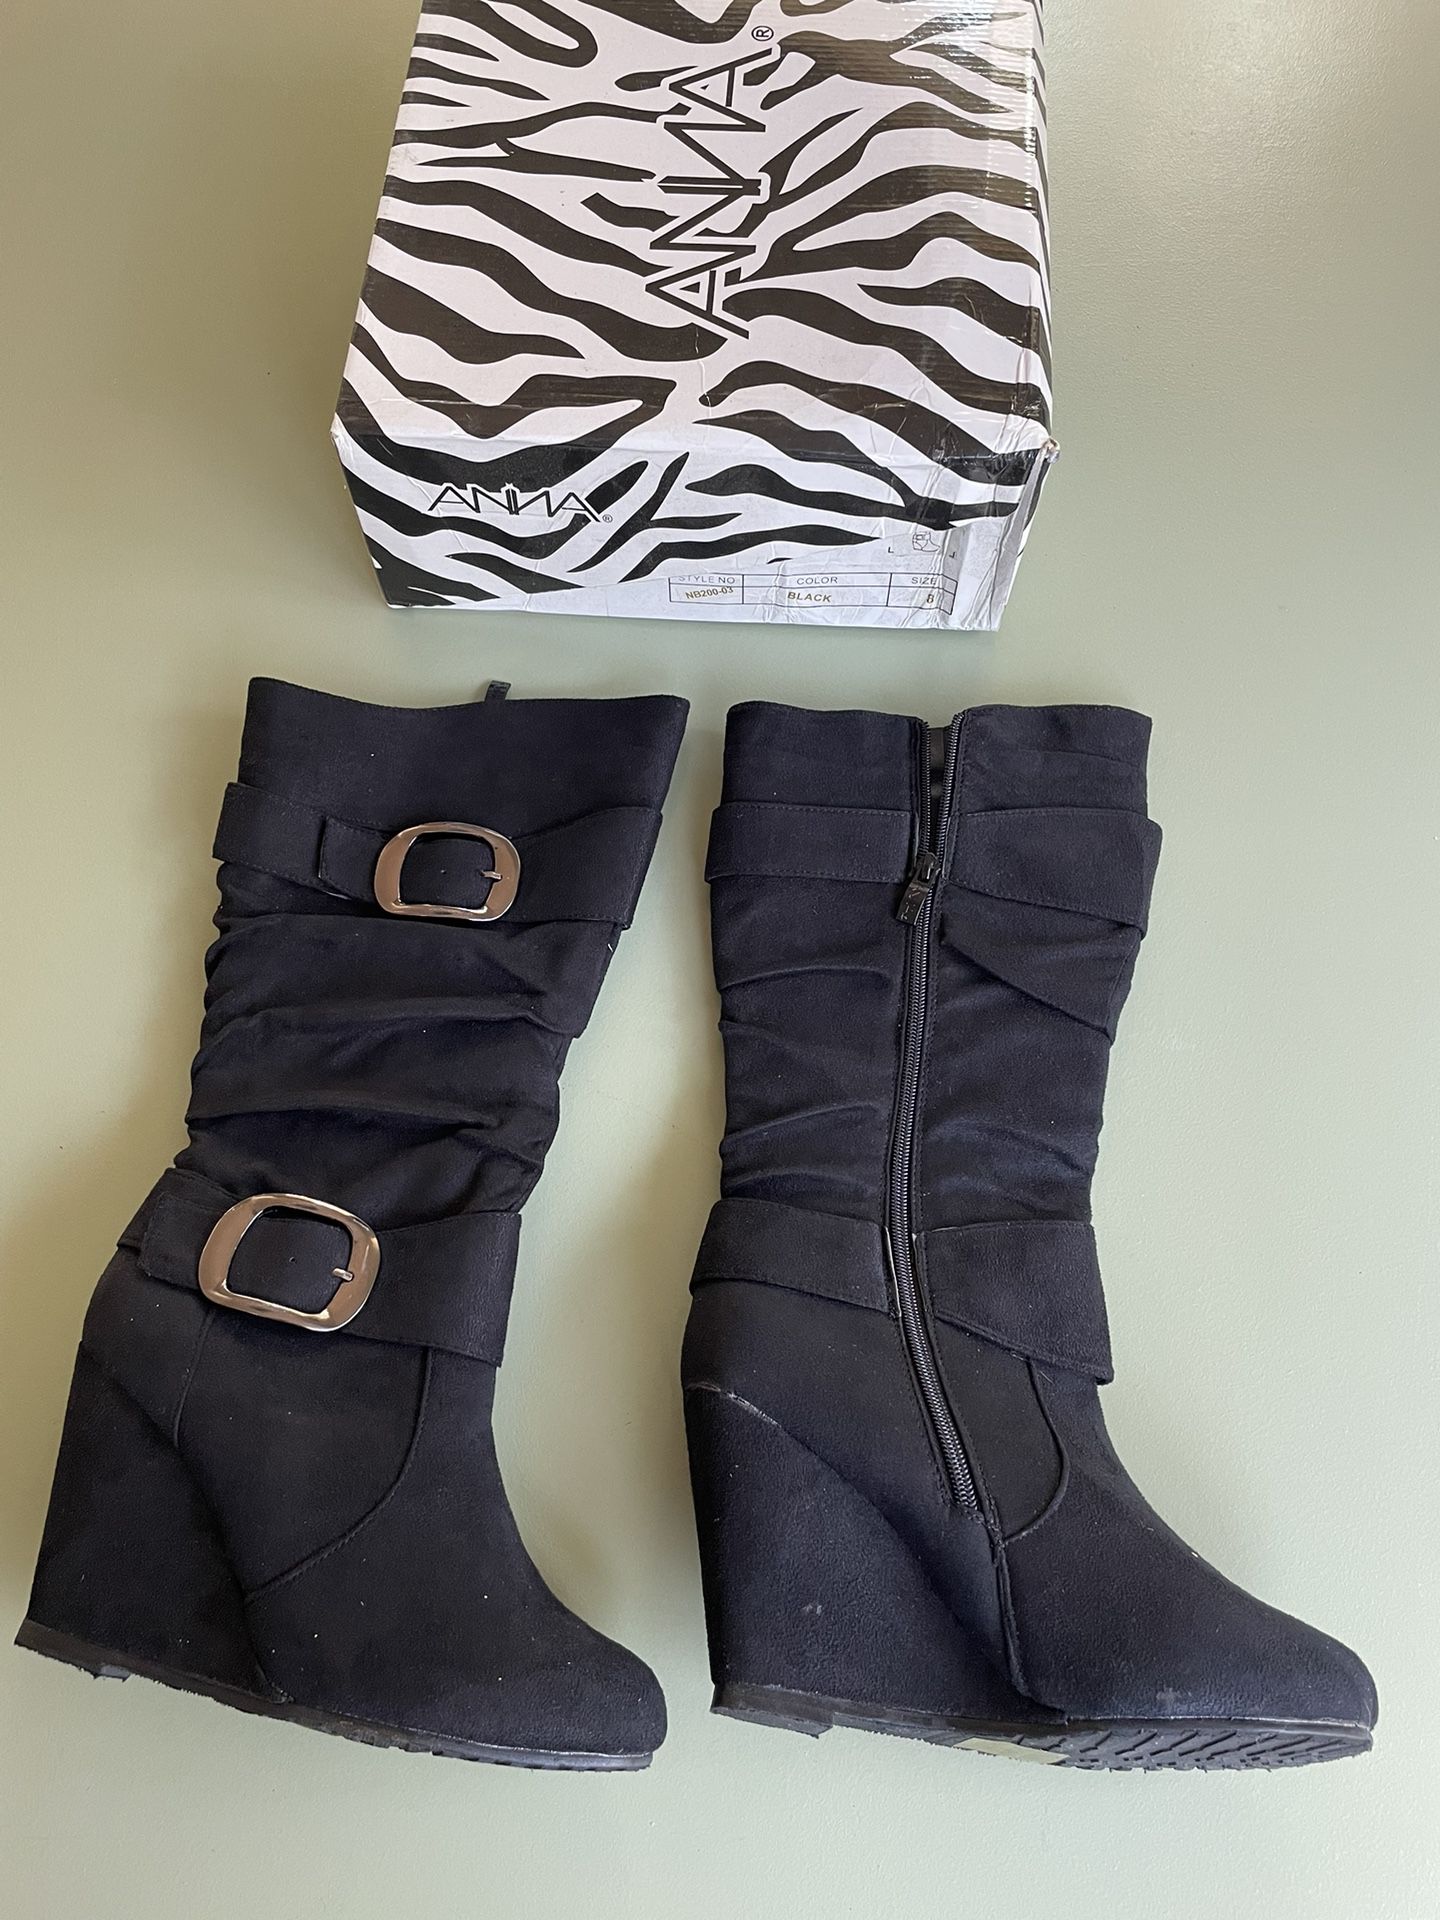 BLACK SUEDE BOOTS - NEW IN BOX - SIZE 8 